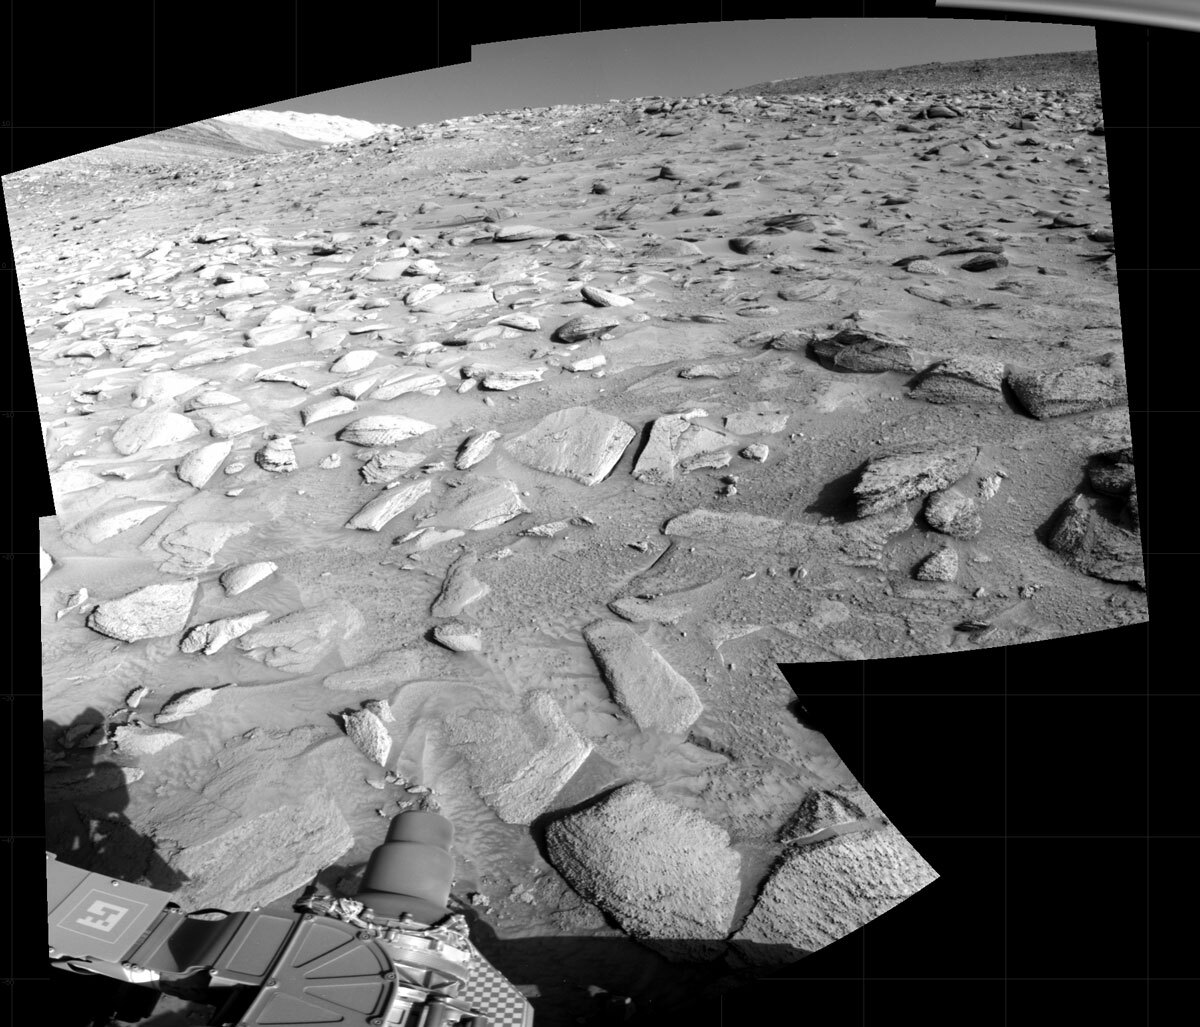 NASA's Mars rover Curiosity took 4 images in Gale Crater using its mast-mounted Right Navigation Camera (Navcam) to create this mosaic.